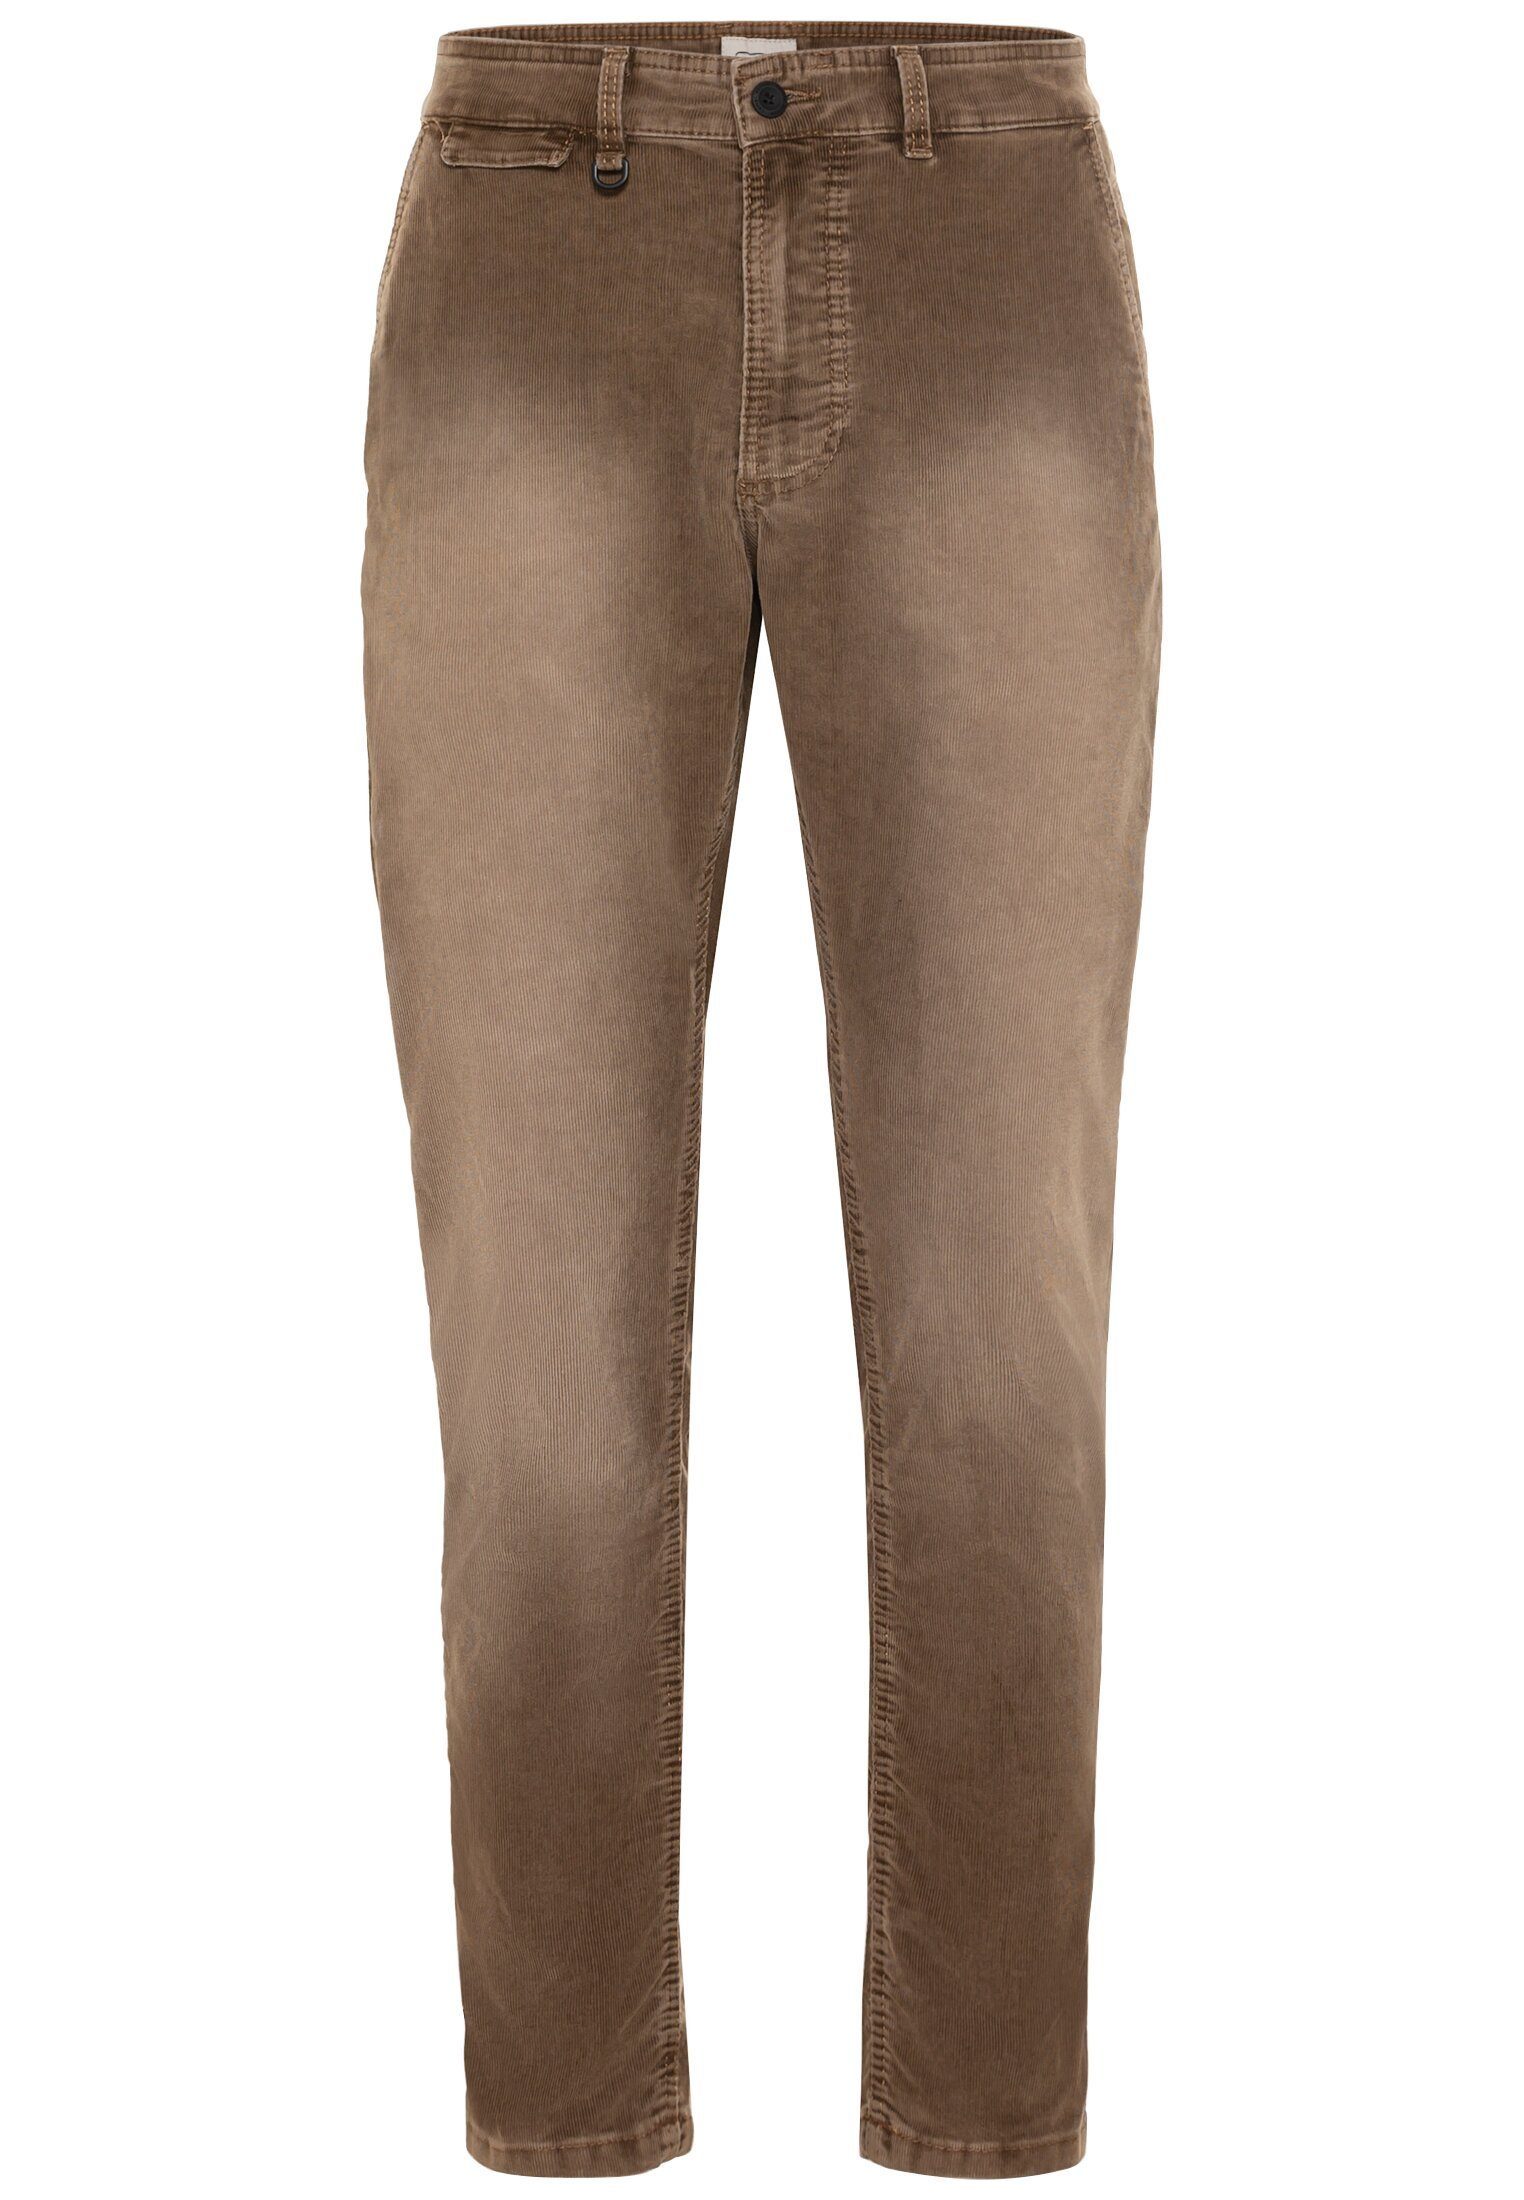 active active Fit Chinohose Tapered camel camel Chino Herren